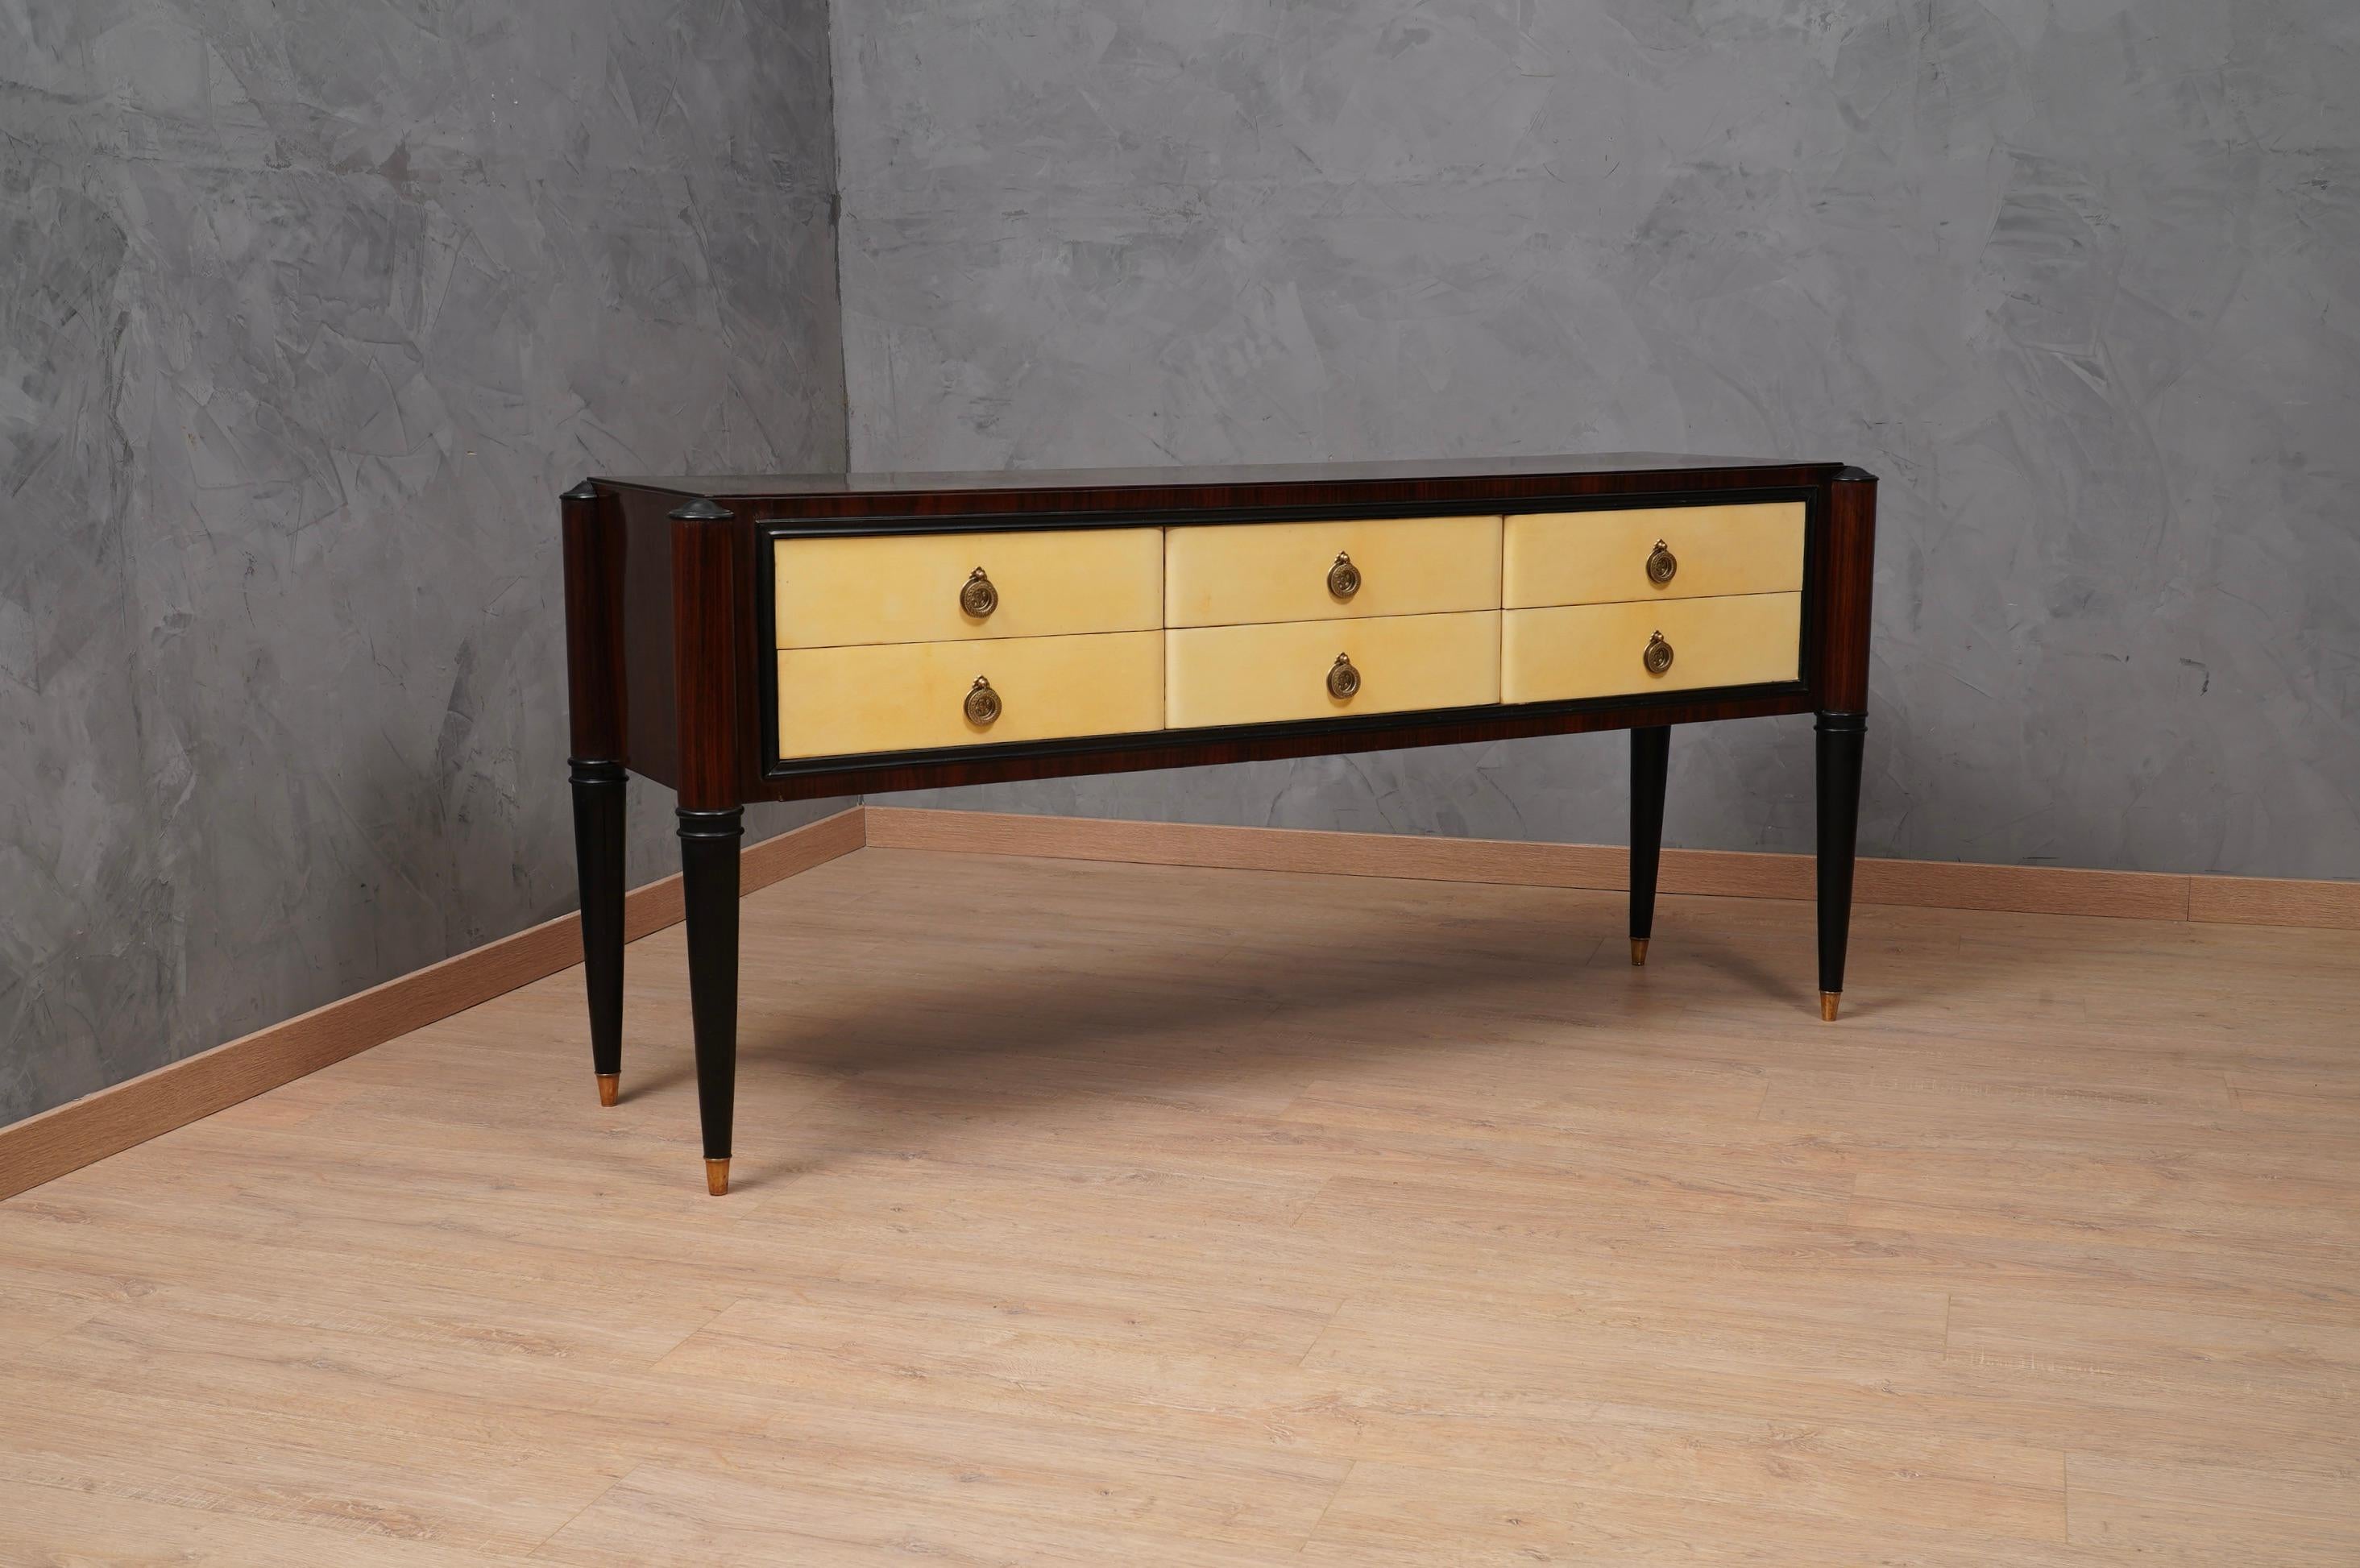 Italian Art Deco dresser of the first half of the last century. One can recognize his Italian style, Paolo Buffa, Vittorio Dassi, Osvaldo Borsani. Precious materials that have been used to compose it, from parchment leather to walnut to brass. Its